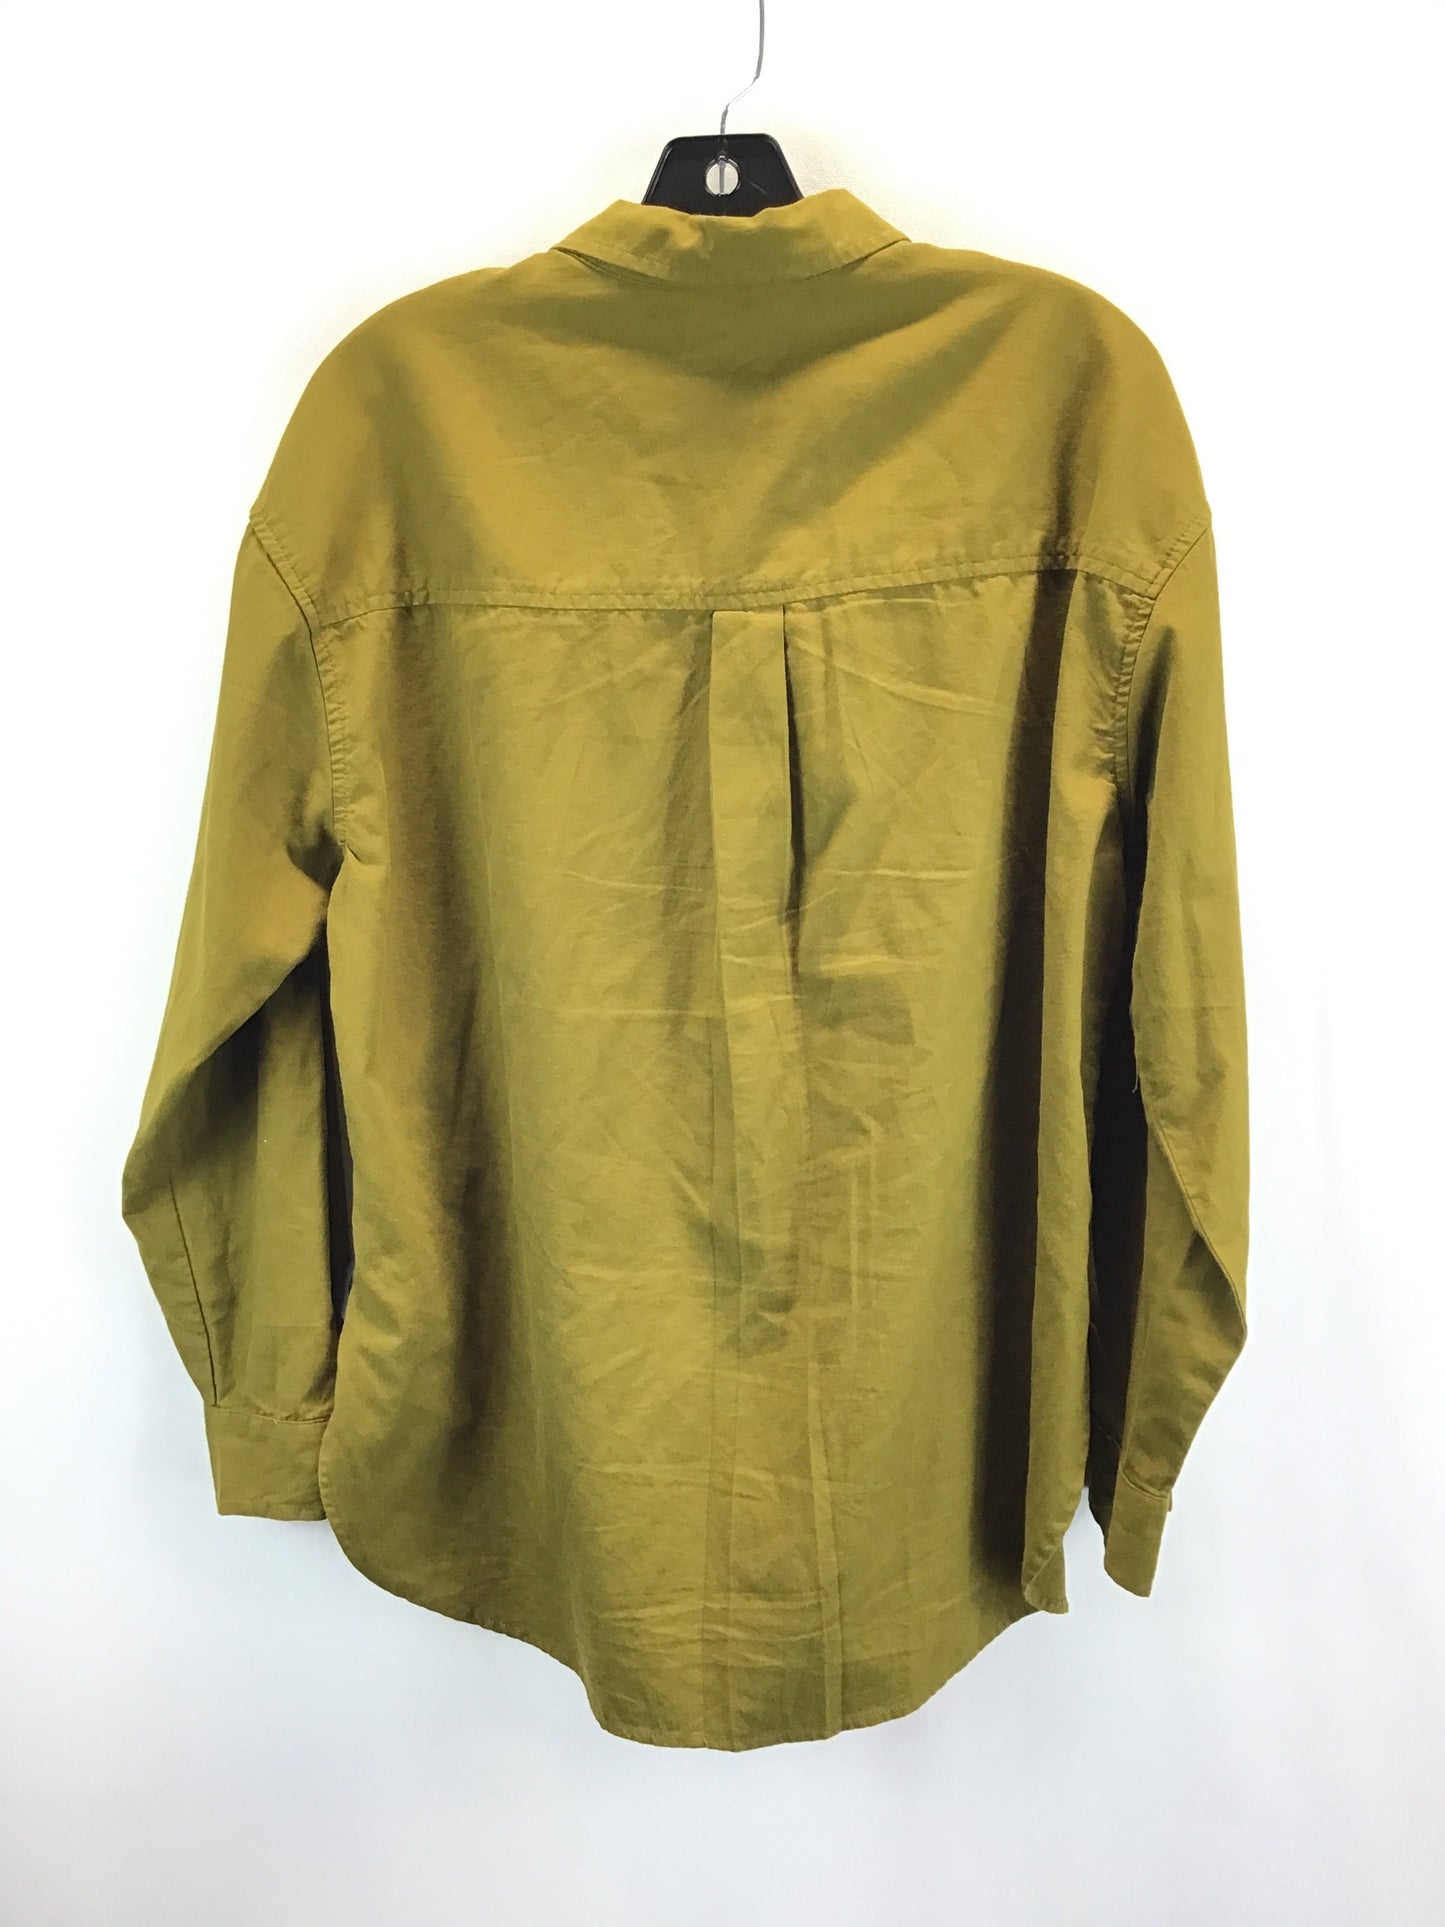 Top Long Sleeve By Universal Thread  Size: M